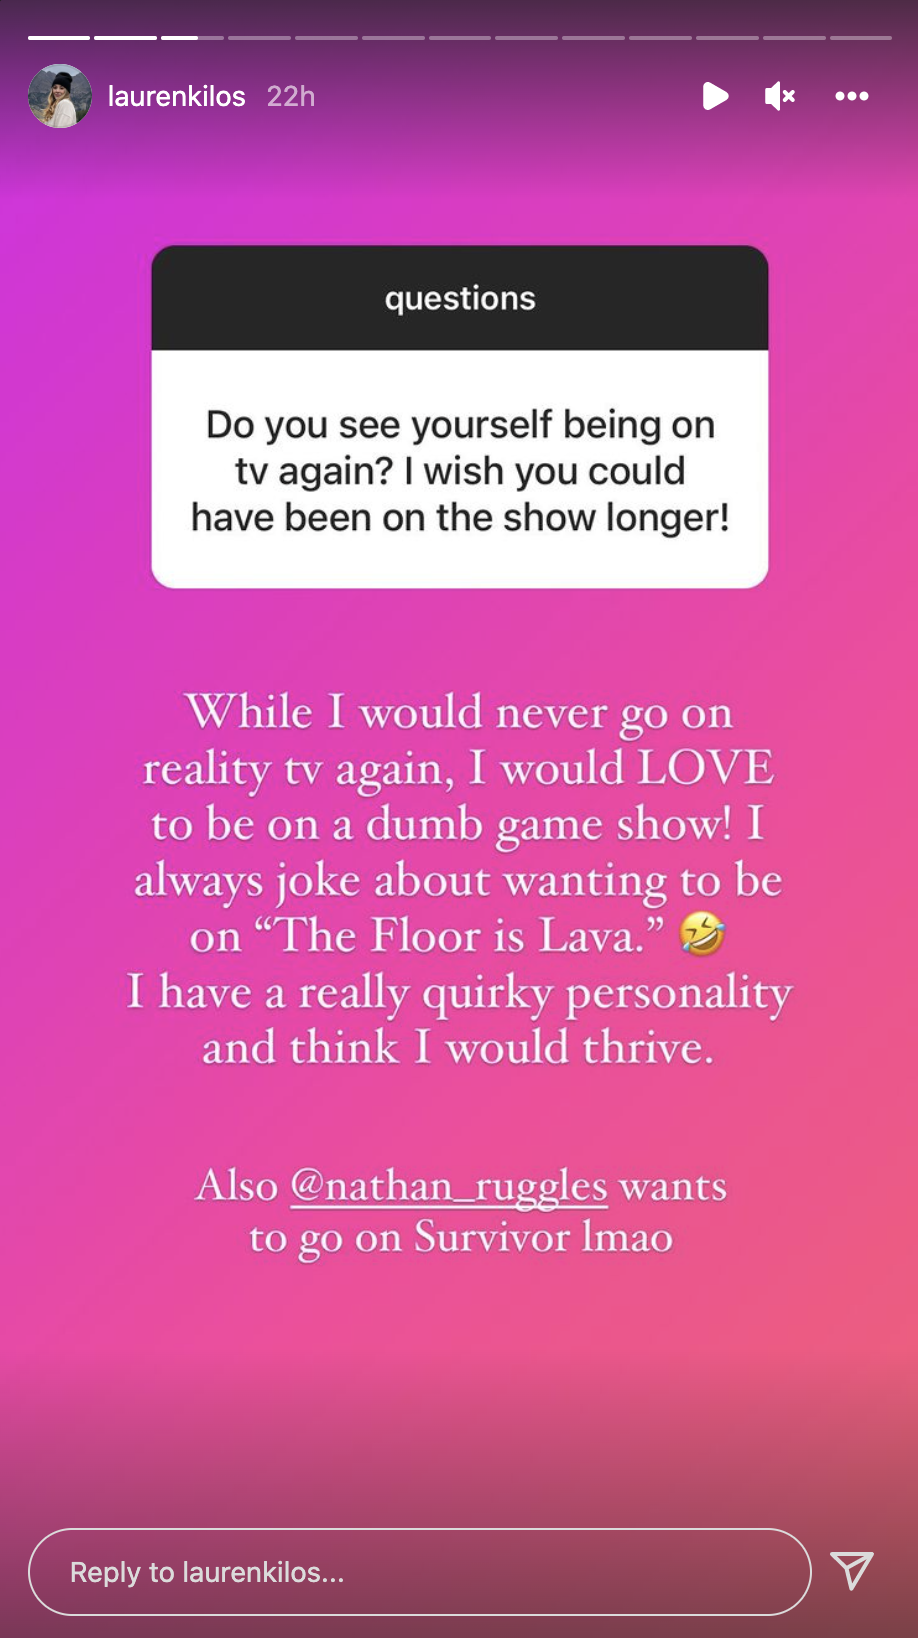 Lauren shares whether she&#x27;d appear on reality TV again in a message shared to Instagram Stories